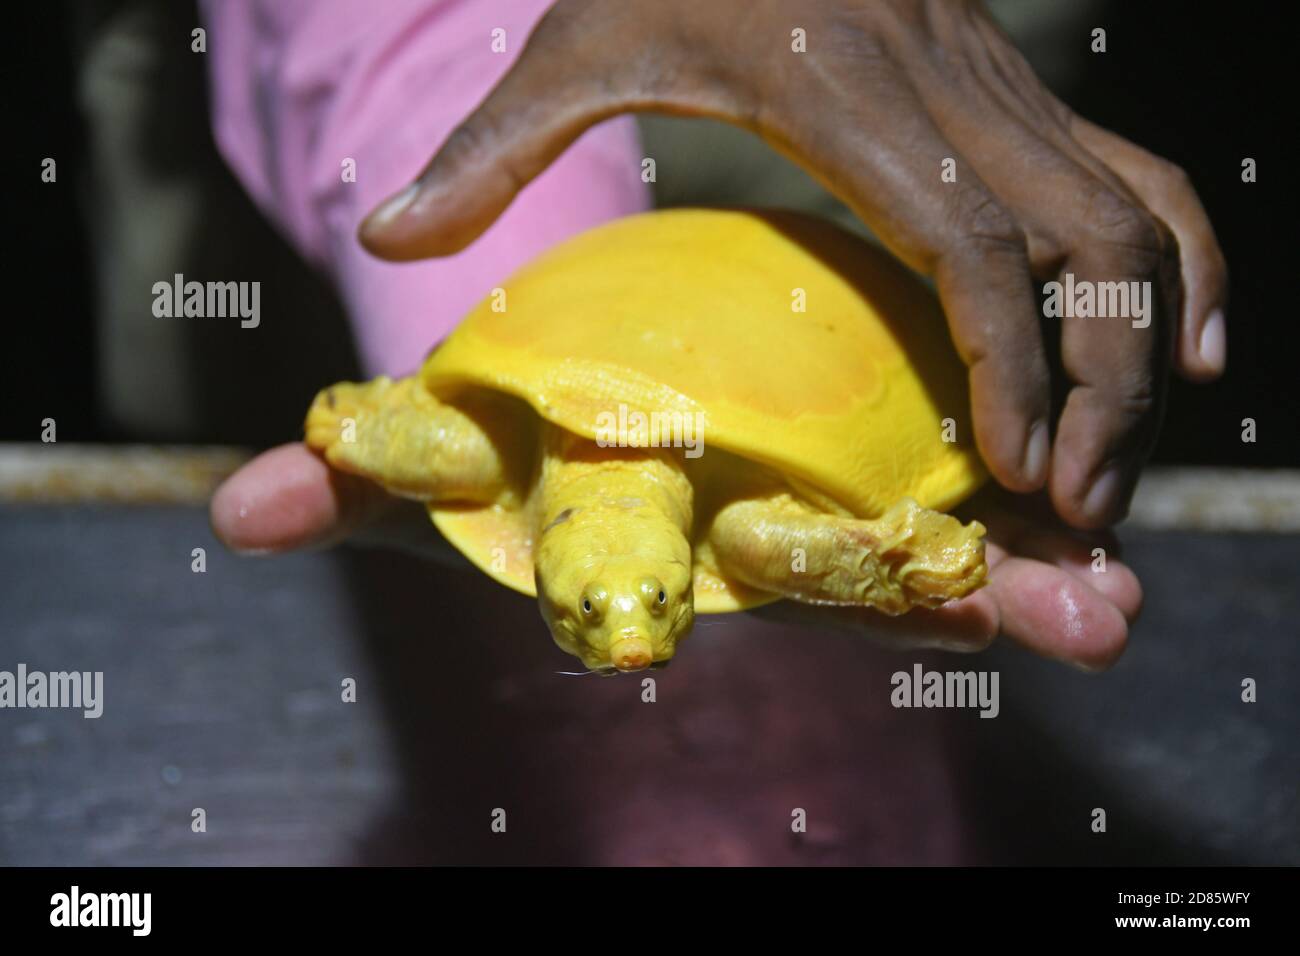 Yellow Turtle - Indian Softshell Turtle prey of rare albinism found from pond in Kaligram village of Purba Bardhaman district and rescued. Stock Photo